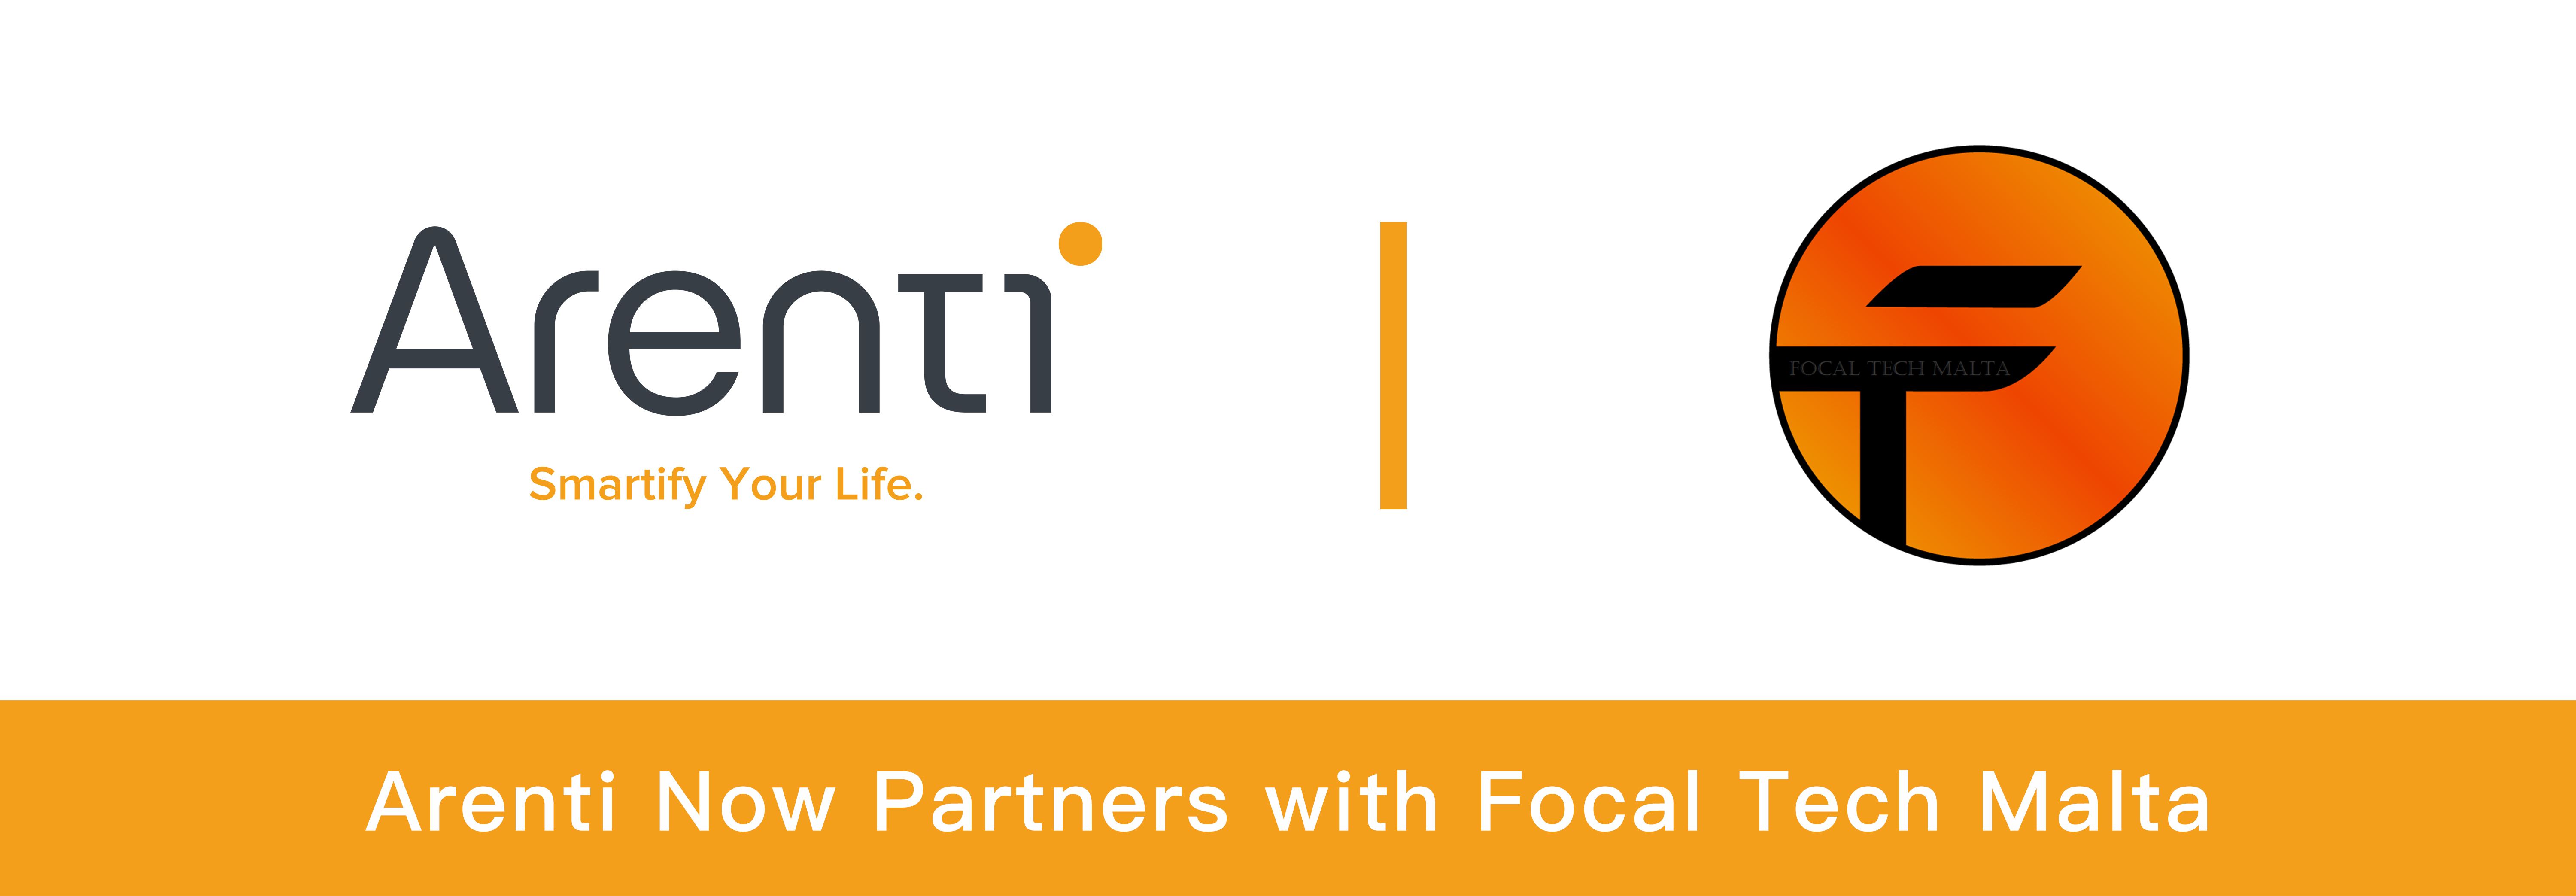 Partner with Focal Tech